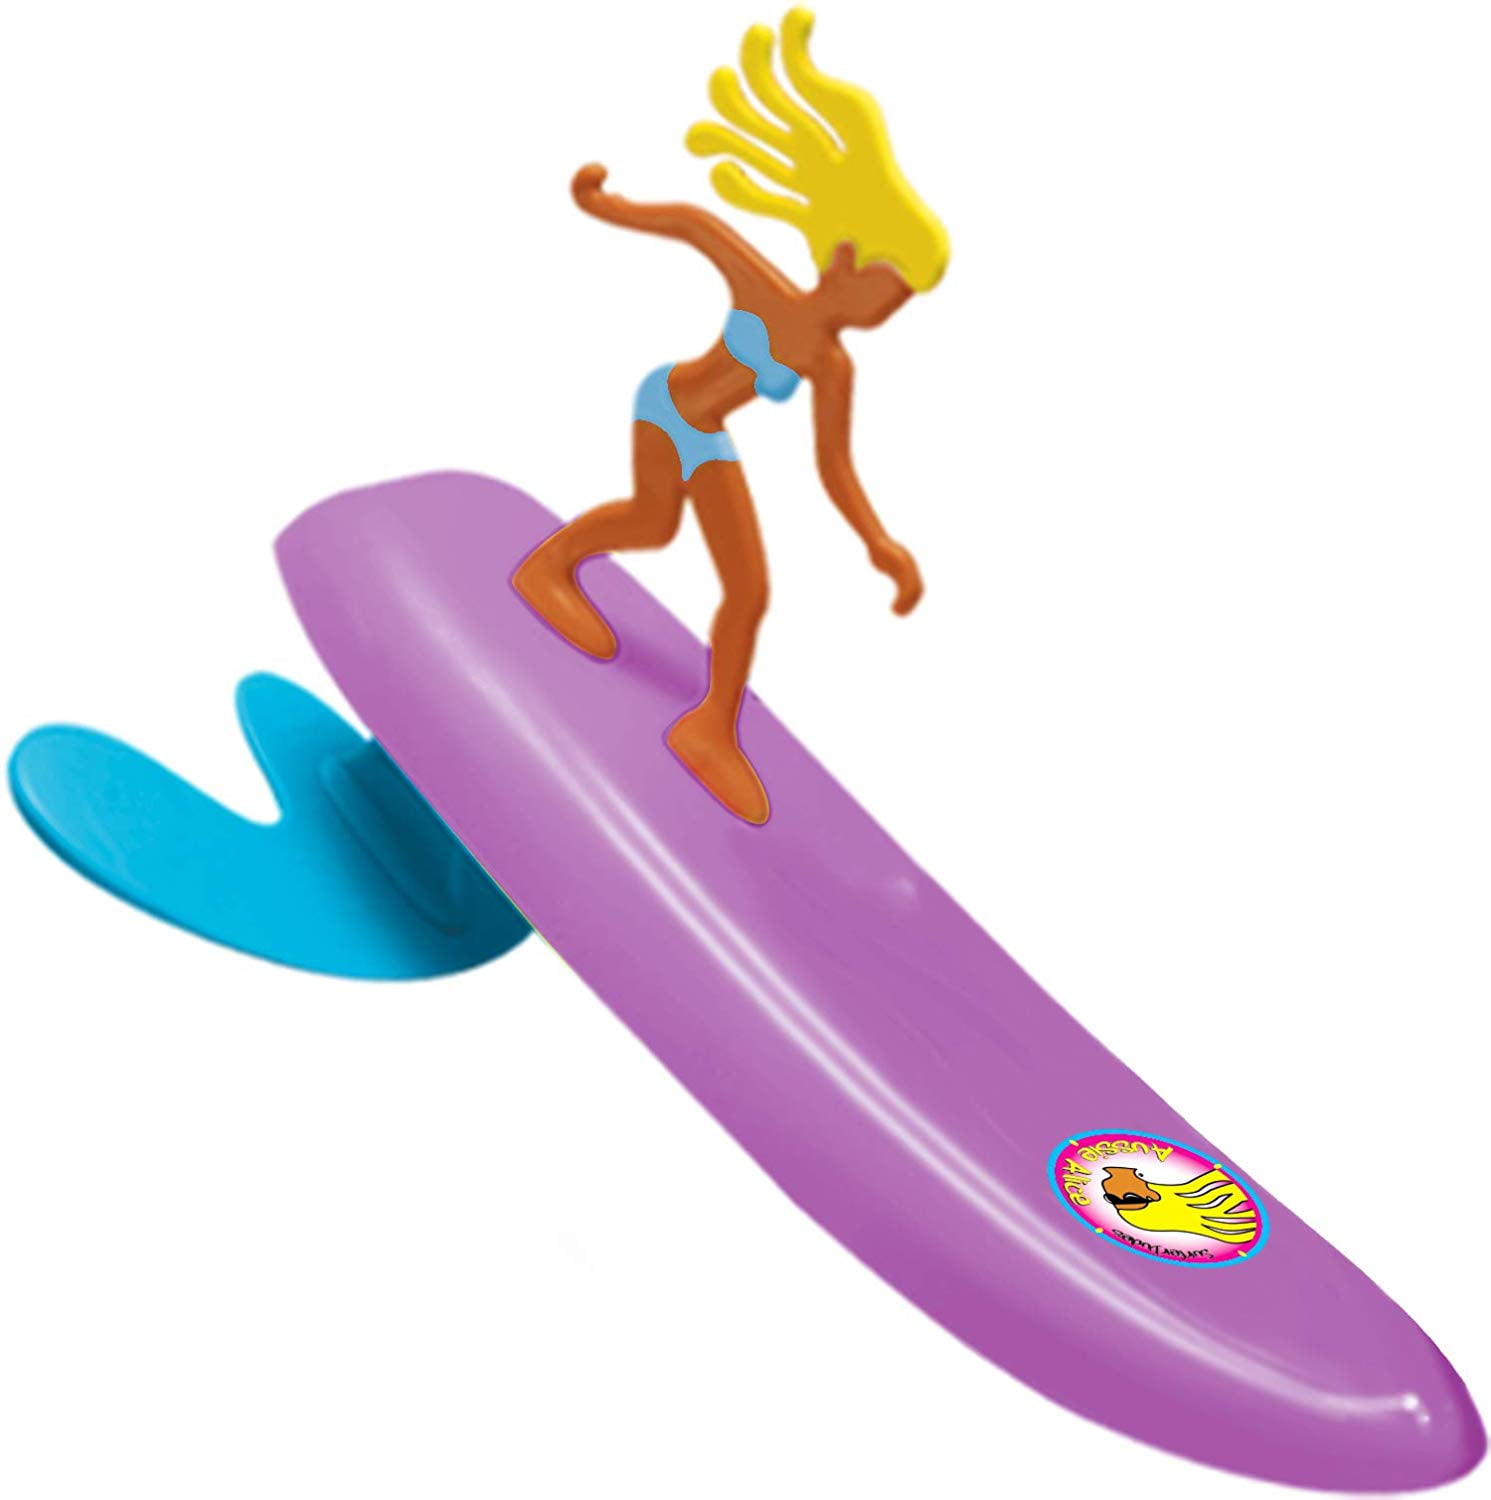 surfer dudes wave powered mini-surfer and surfboard toy - blue